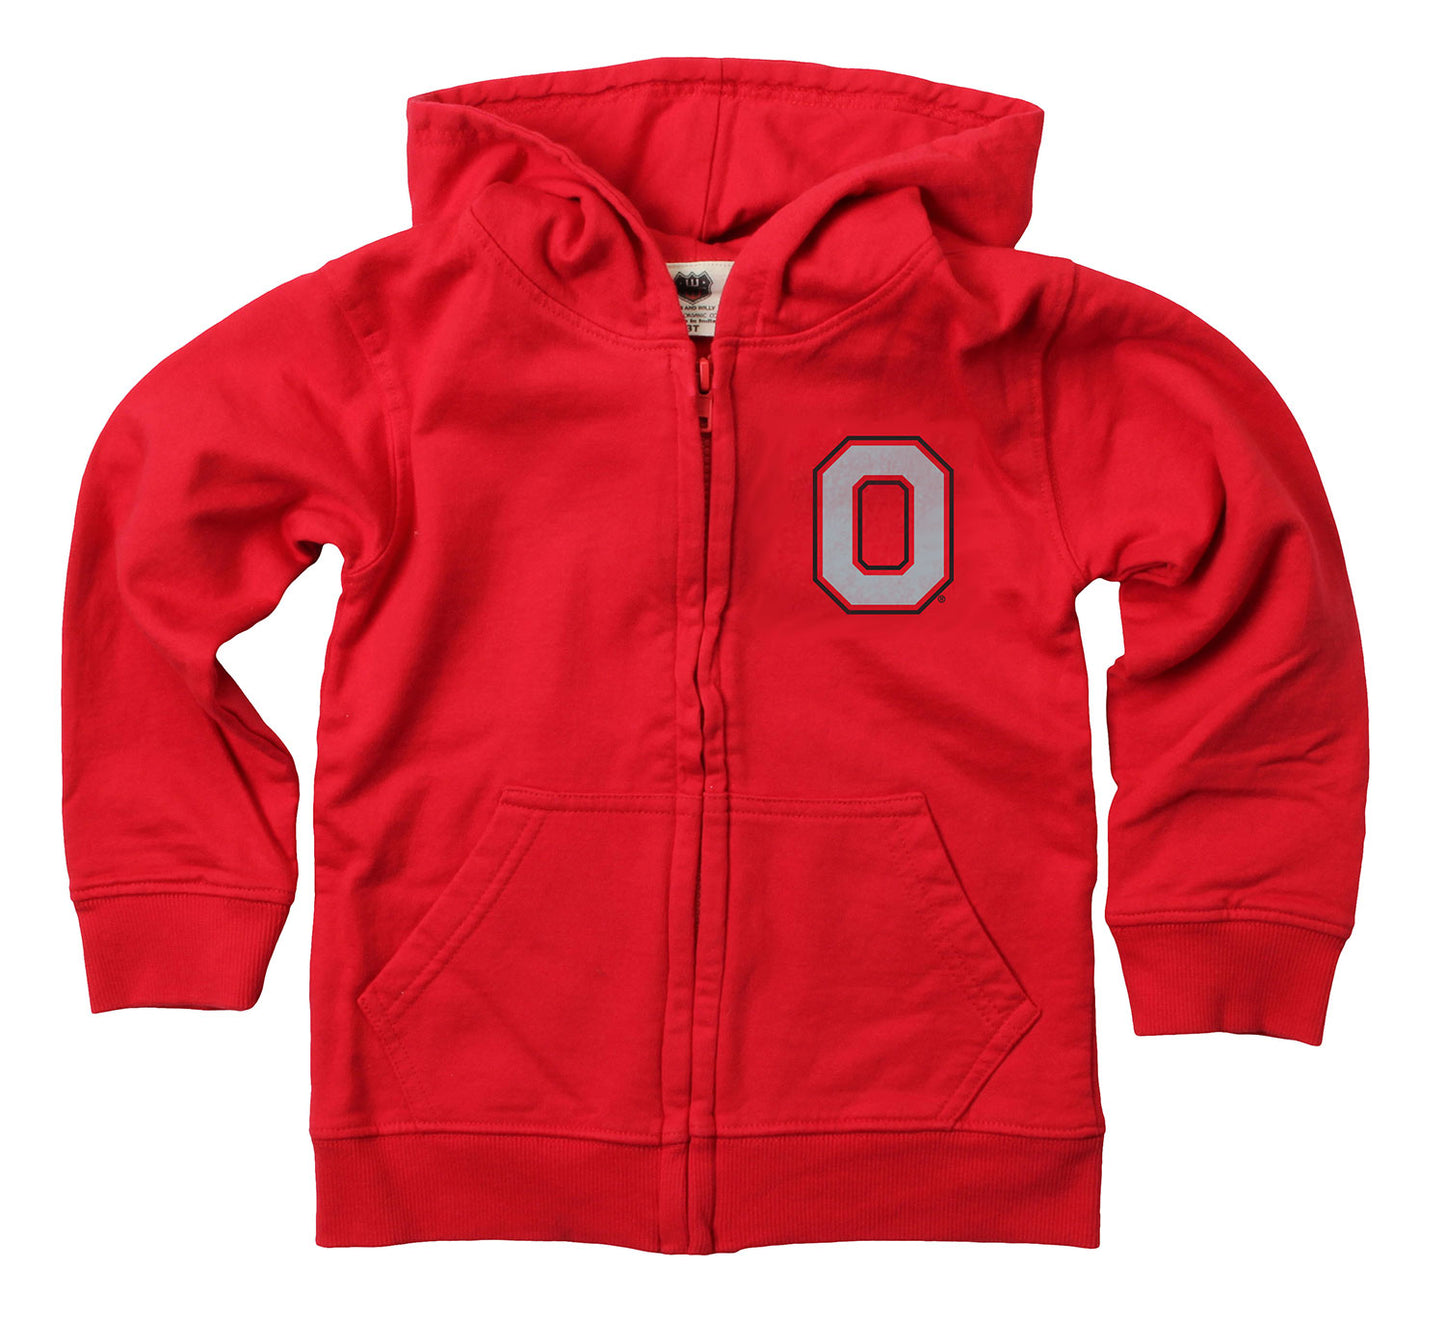 Ohio State Buckeyes Wes and Willy Boys Zip Up Fleece Hooded Jacket Red Leaf